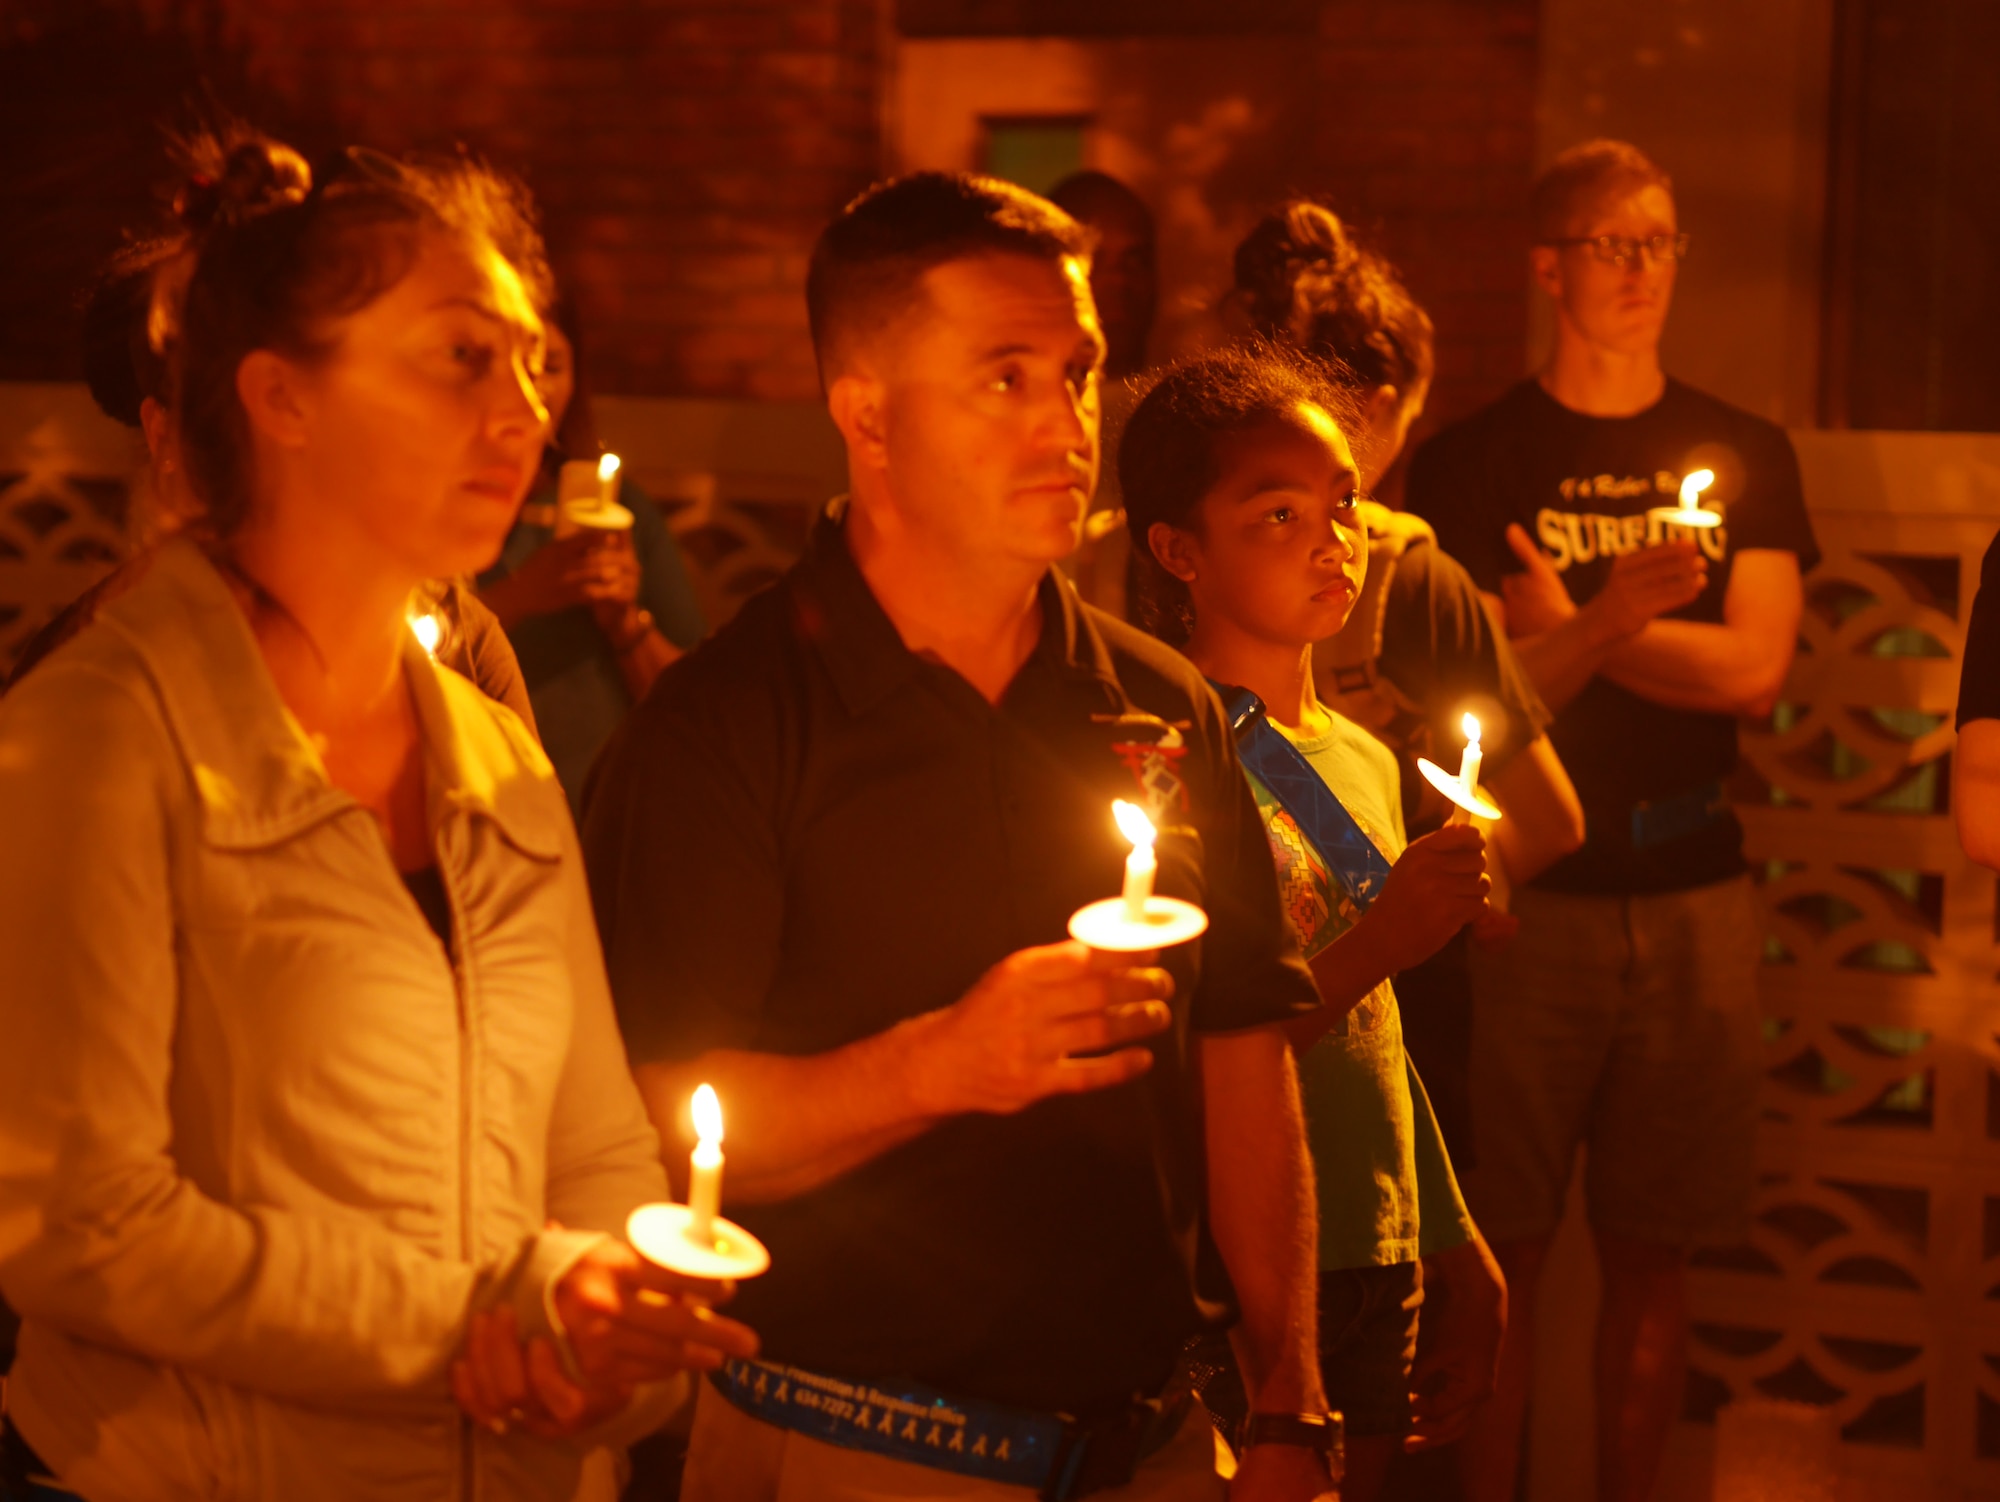 Participants of Take Back the Night march illuminate the night together in the Chapel 2 courtyard on Kadena Air Base, Japan, May 1, 2015. Together they banished the darkness in the courtyard symbolizing unity and togetherness. (U.S. Air Force photo/Senior Airman Omari Bernard)